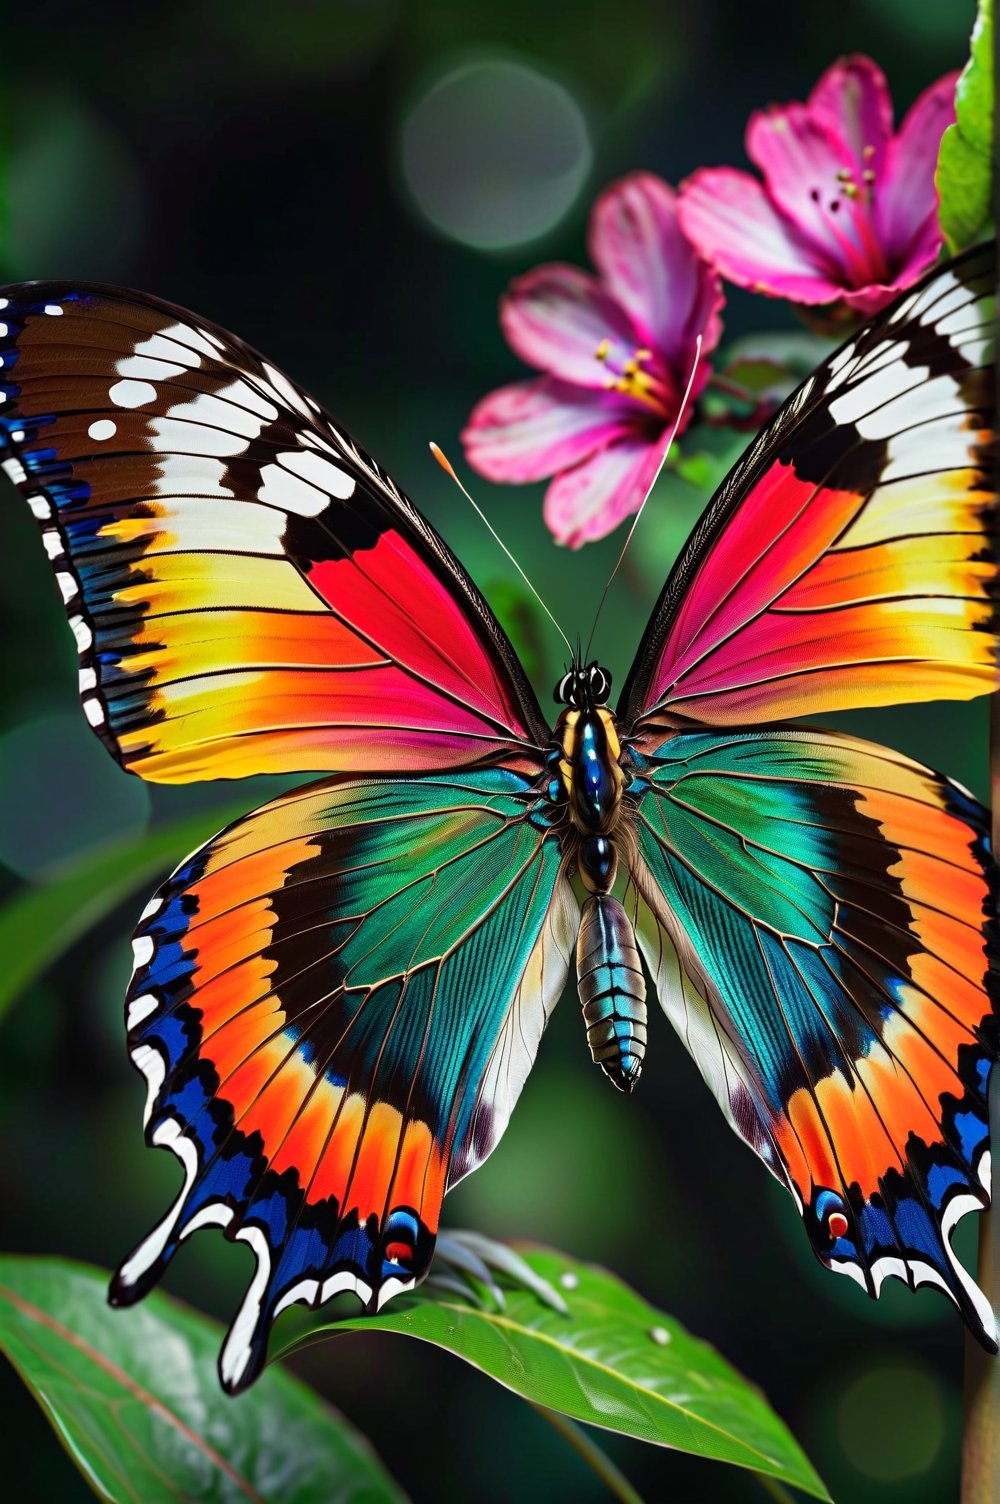 A lush, multicolored butterfly looking straight at the camera in a stunning close-up. Captured in stunning 8K resolution, this image is a hyper-realistic work of art that incorporates Miki Asai's macro photography technique. Every detail is meticulously highlighted, making this photograph a high-definition masterpiece. Composed by Greg Rutkowski, this image is making waves on ArtStation due to its studio quality, sharp focus, and intricate details that make it truly exceptional.